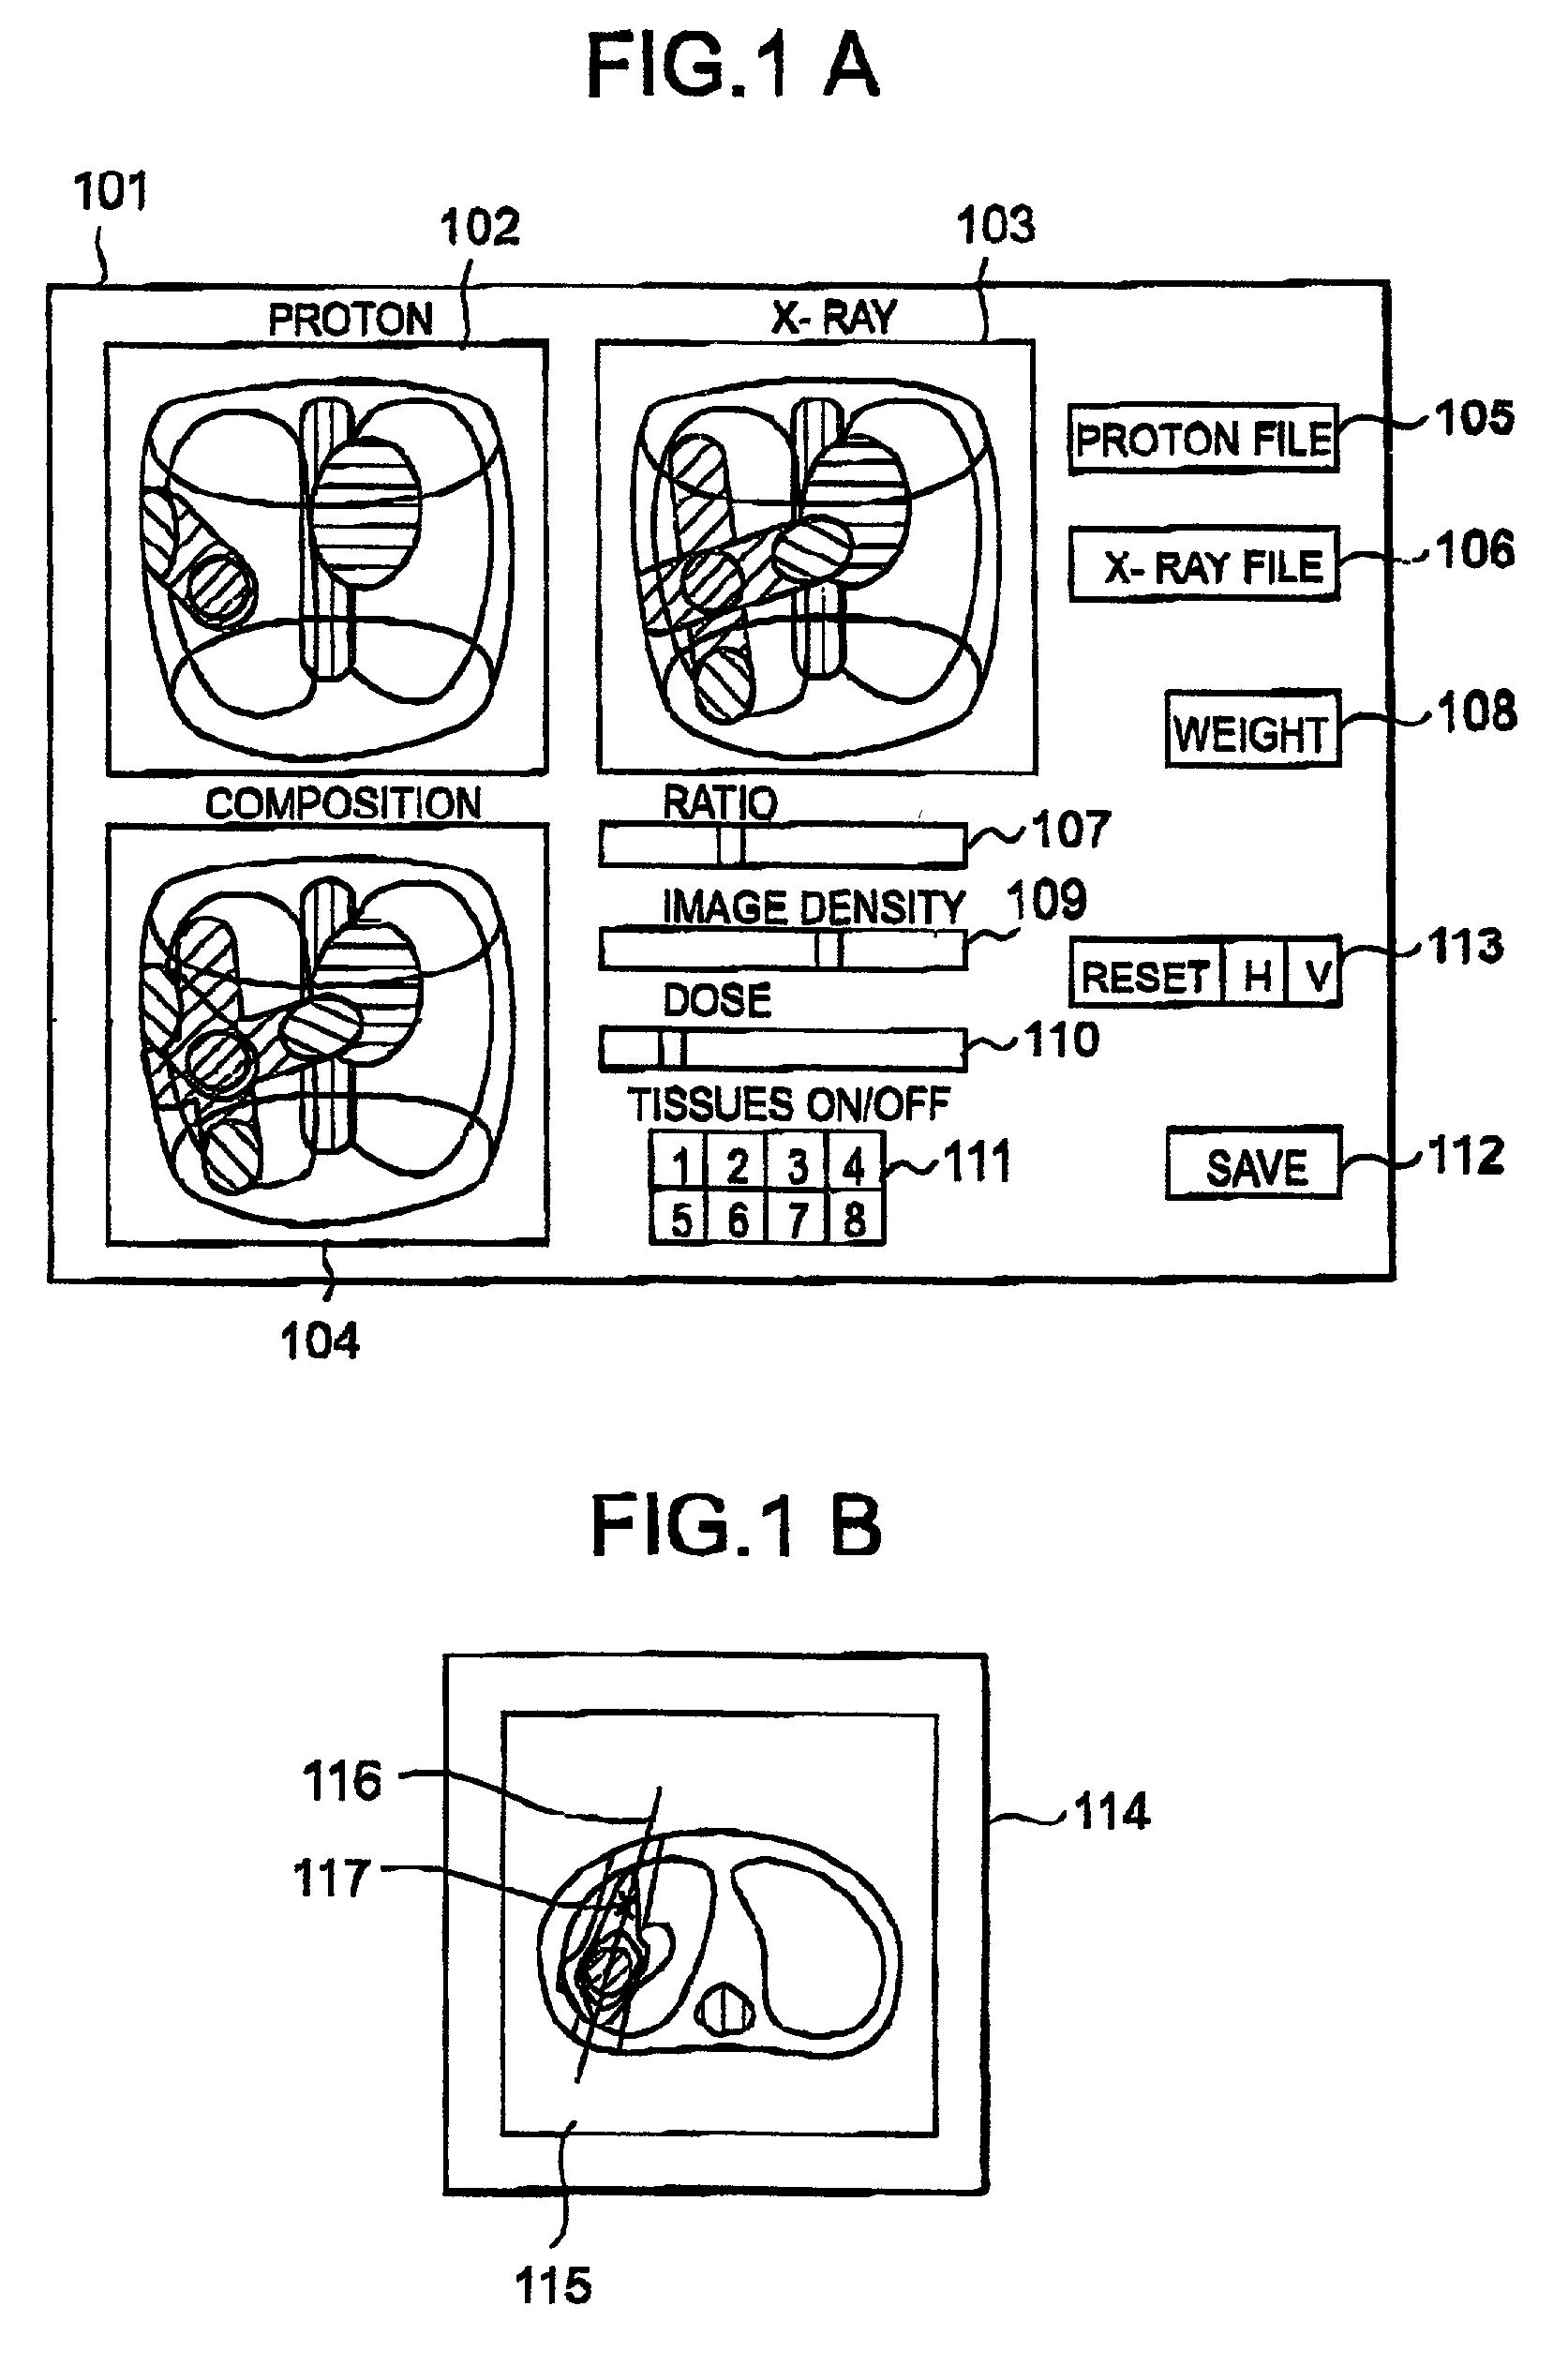 Mixed irradiation evaluation support system